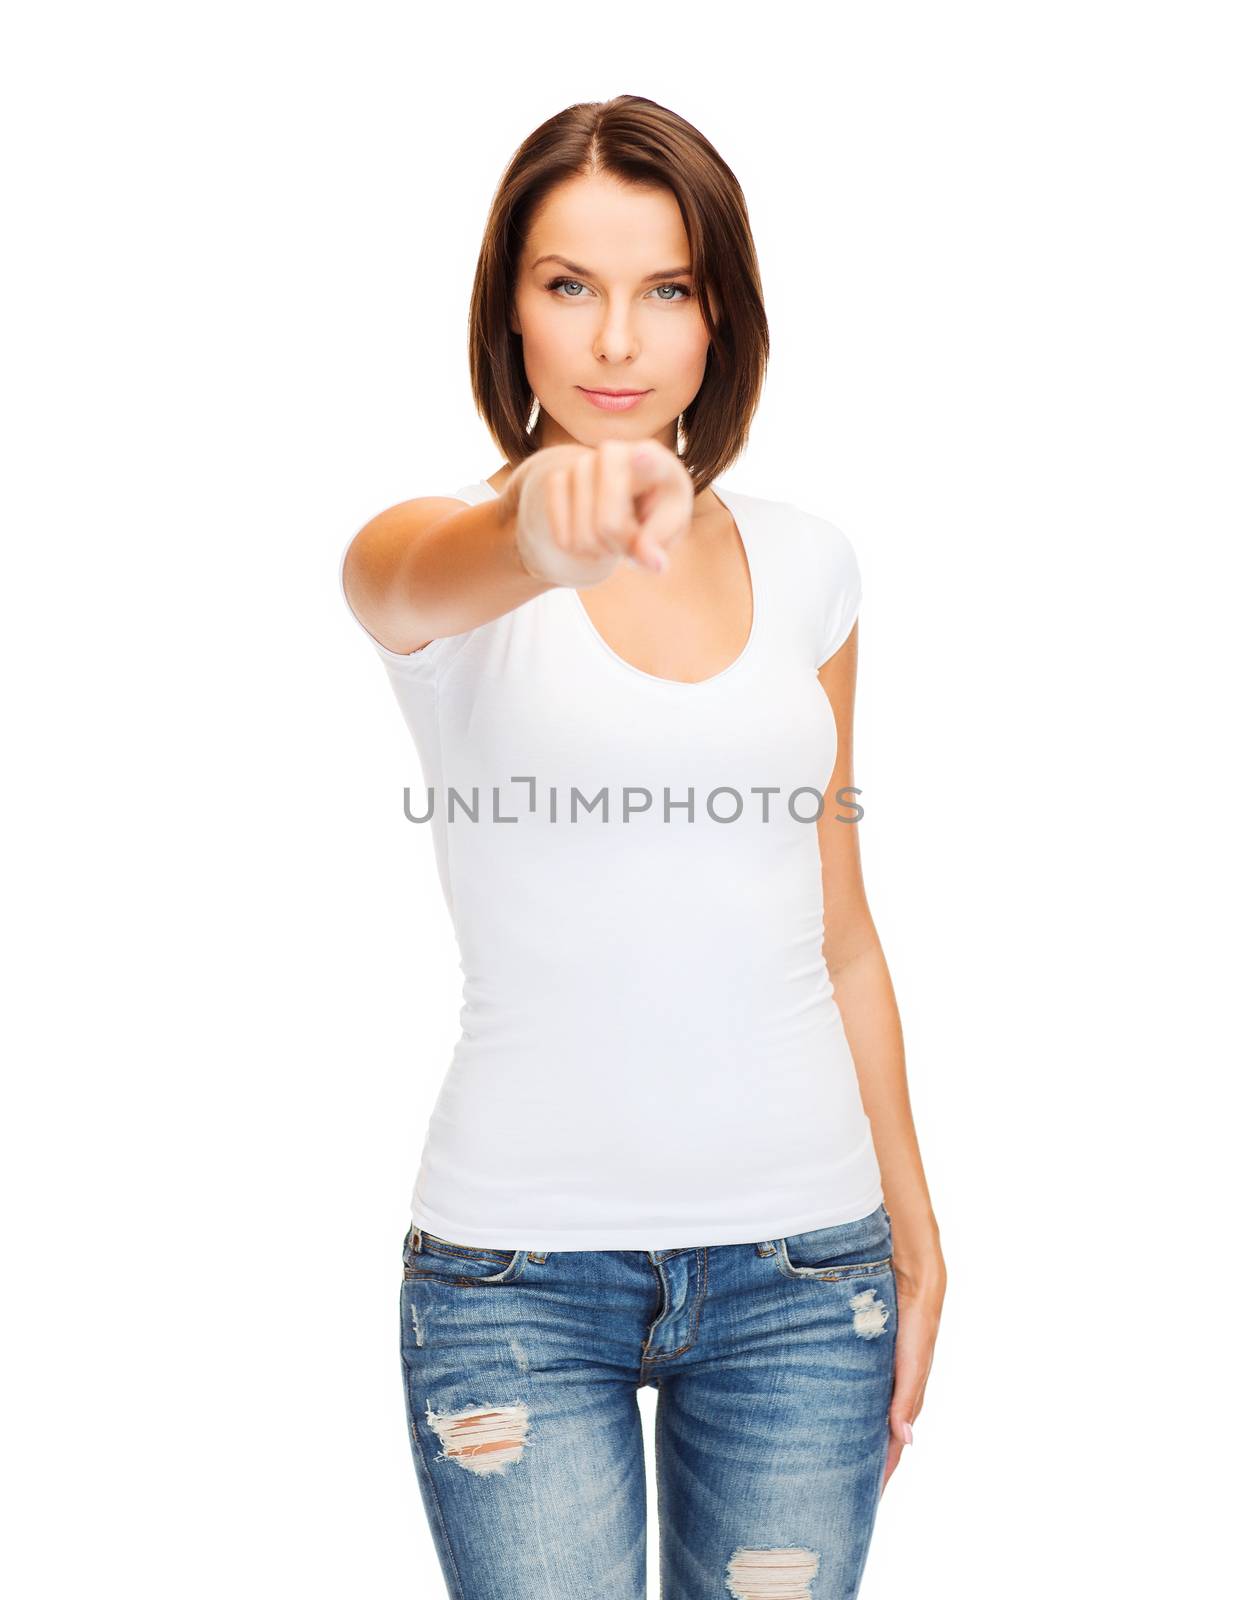 gestures and people concept - woman in blank white t-shirt pointing at you